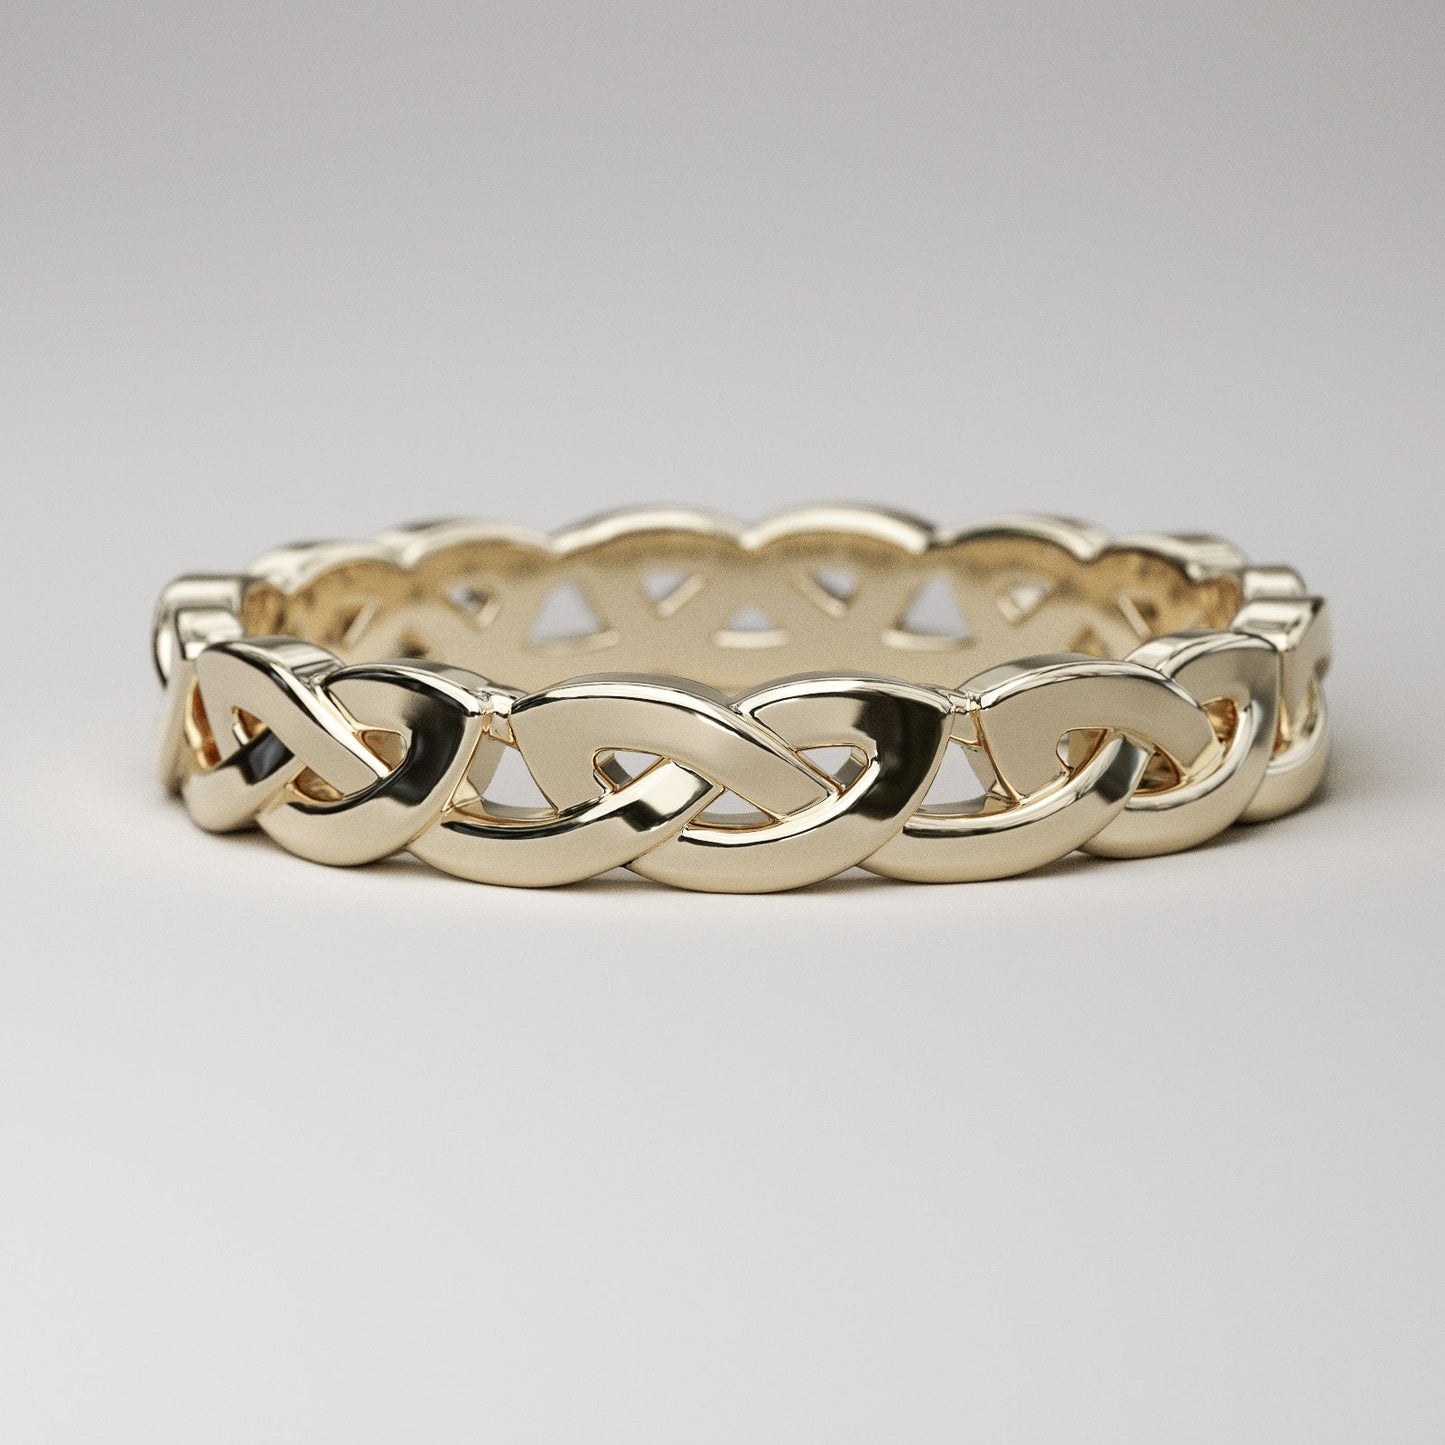 Yellow gold Celtic wedding band - overhand knot eternity ring for women